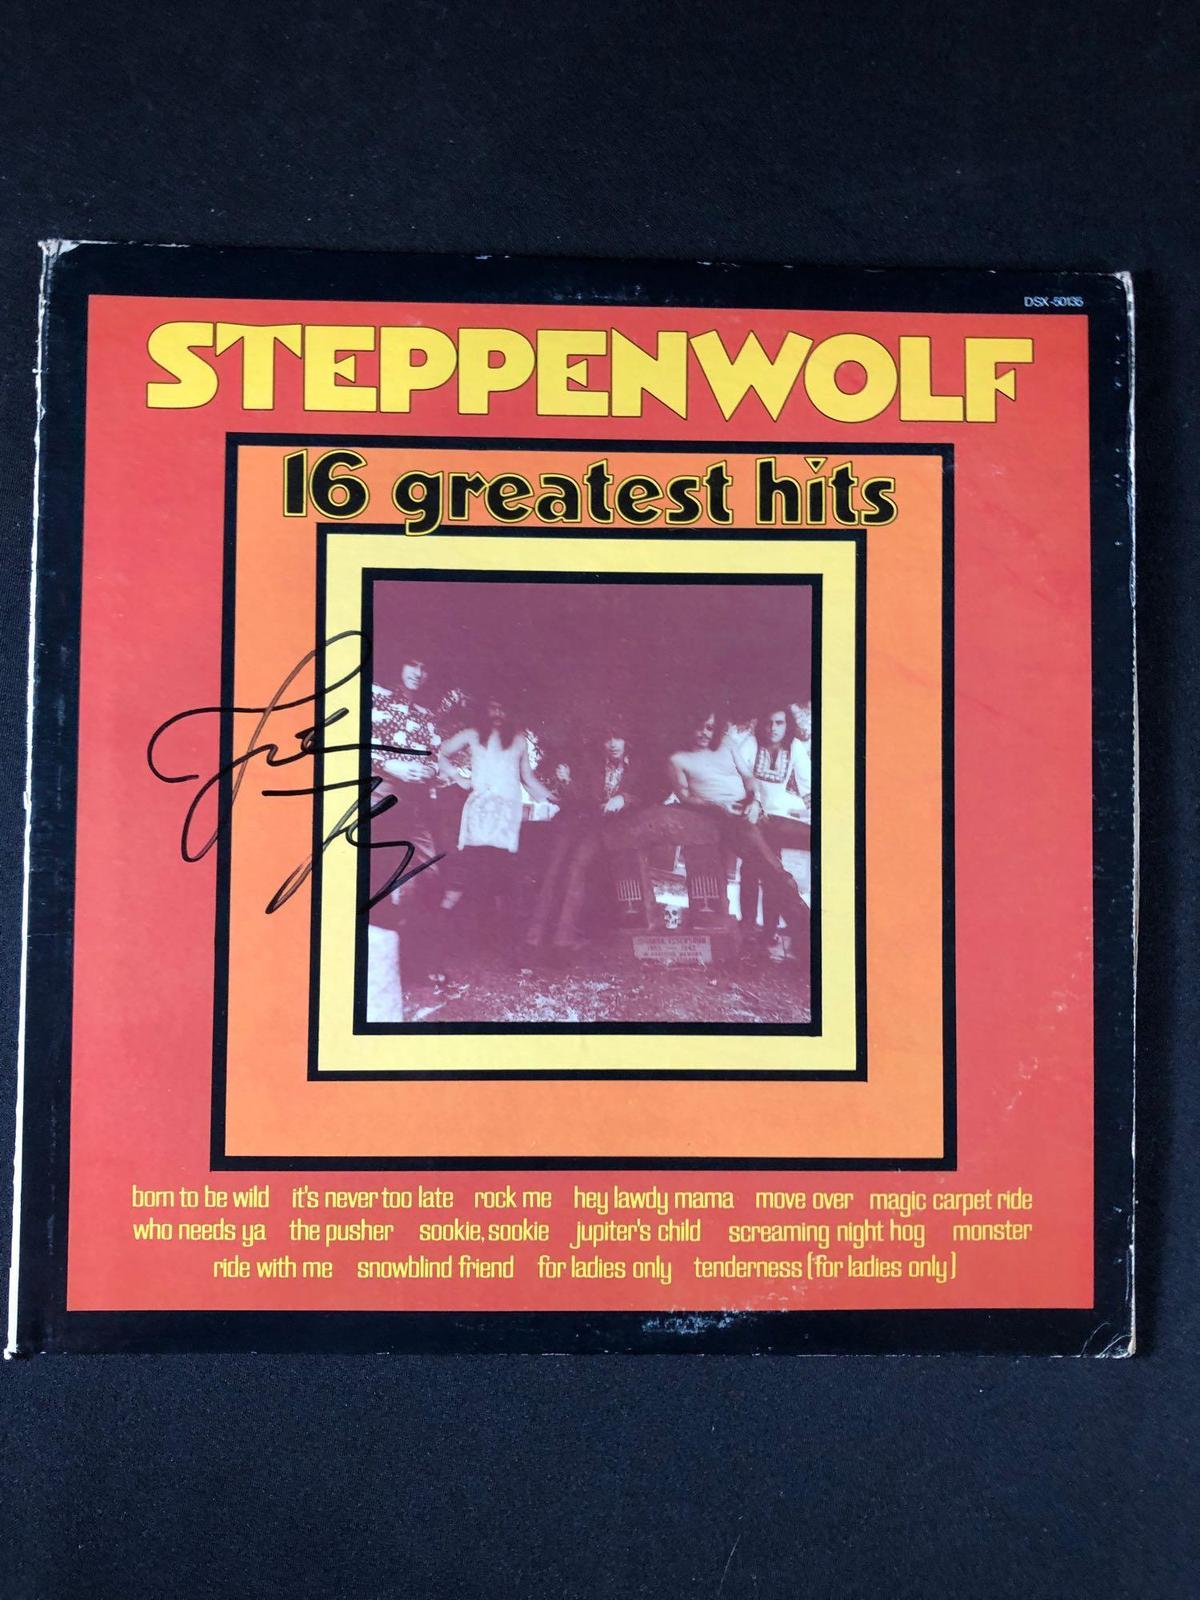 Steppenwolf "16 Greatest Hits" Autographed Album signed by John Kay